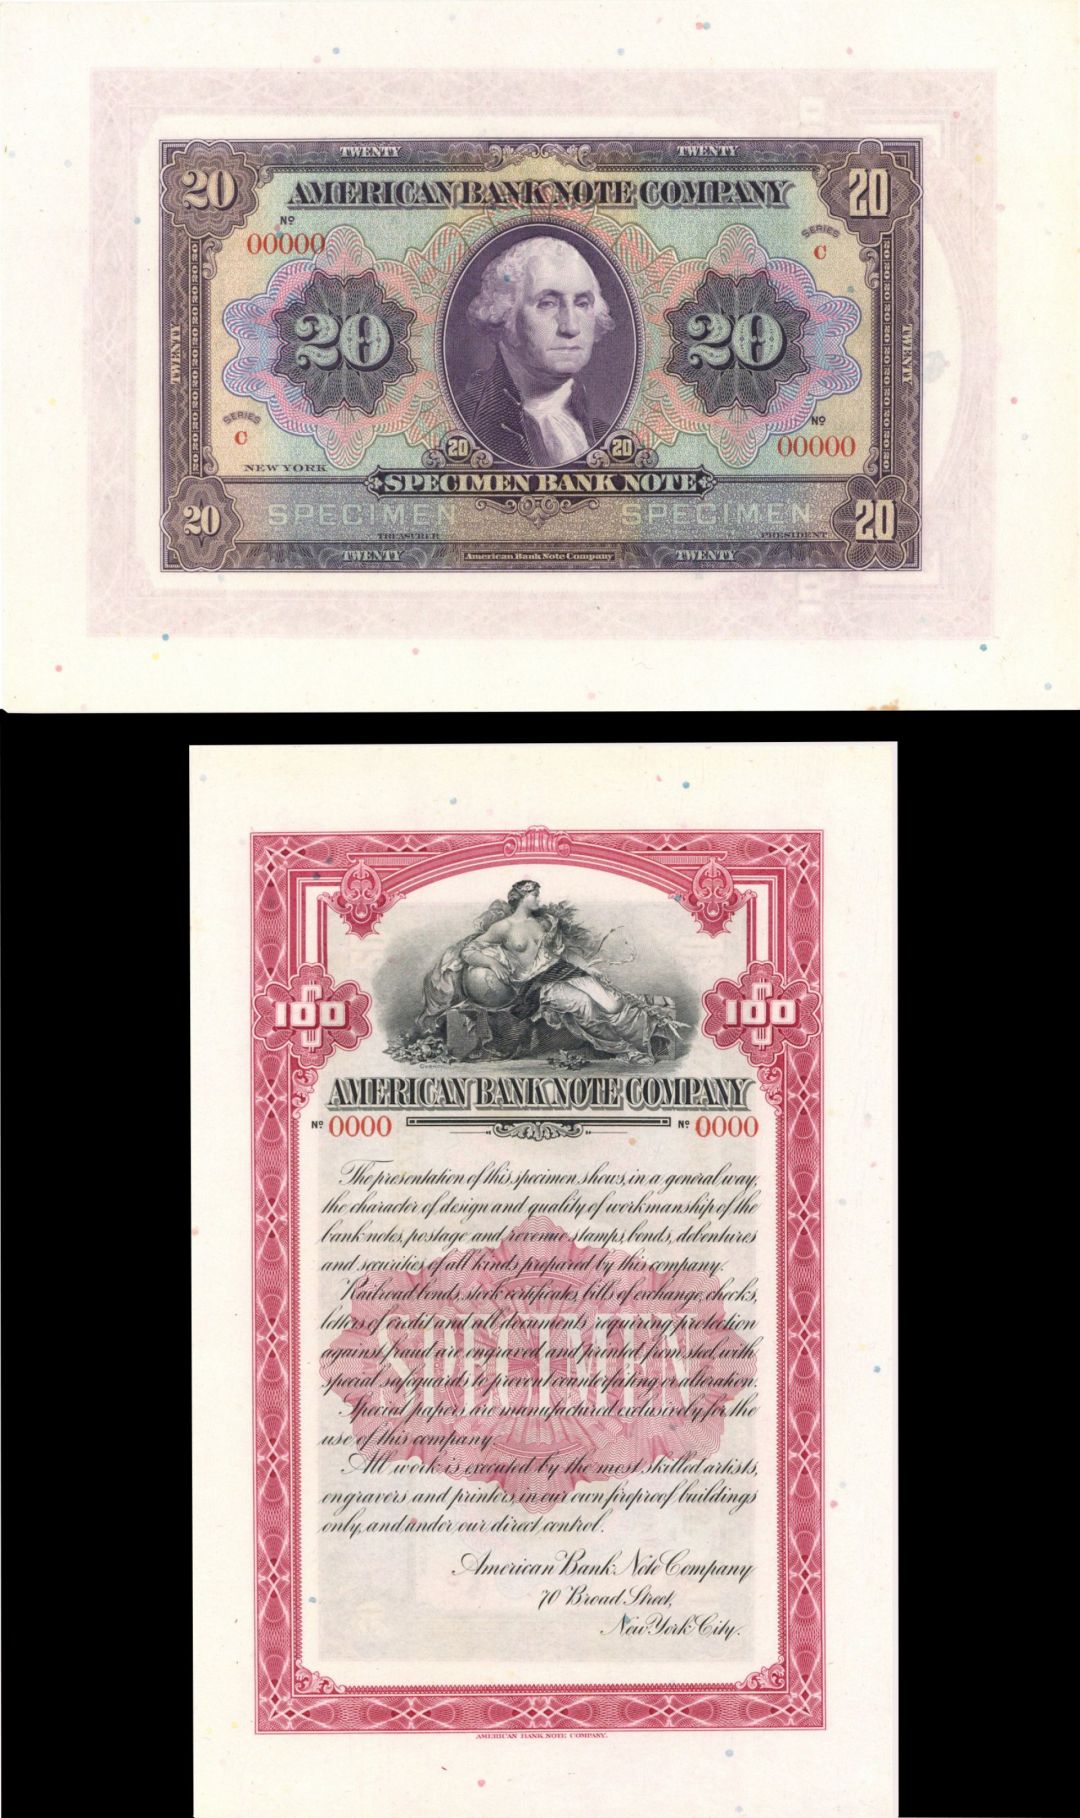 SPECIMEN - Double Sided - American Bank Note Co. - Measures about 5" x 8" - Gorgeous Advertisement Sample